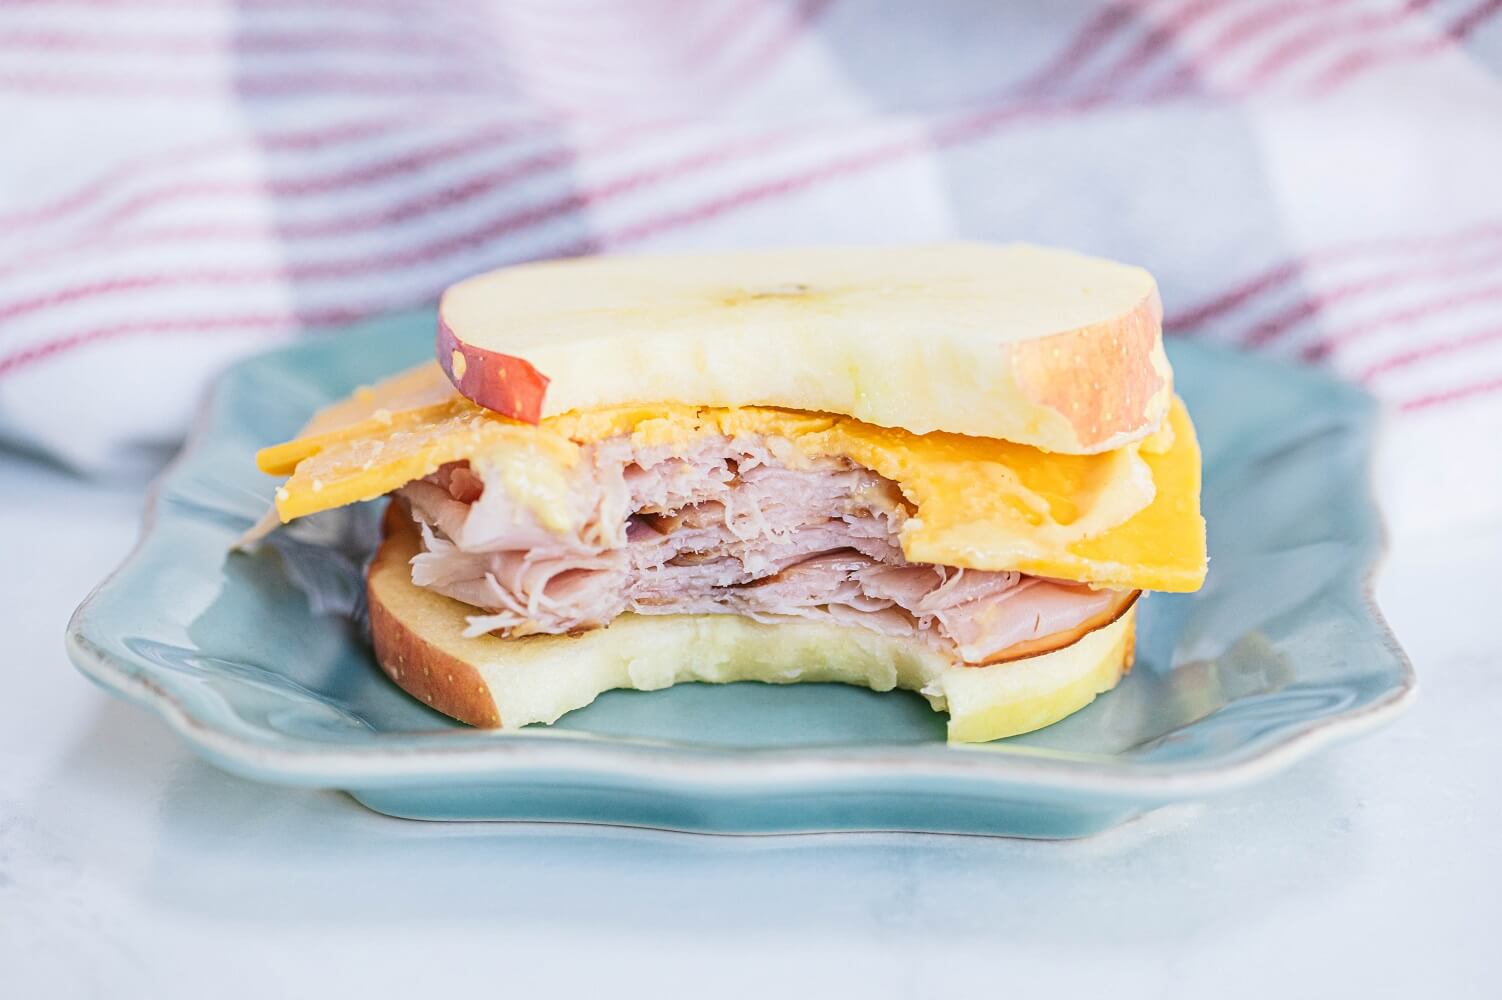 Take a crunchy bite out of this sandwich!